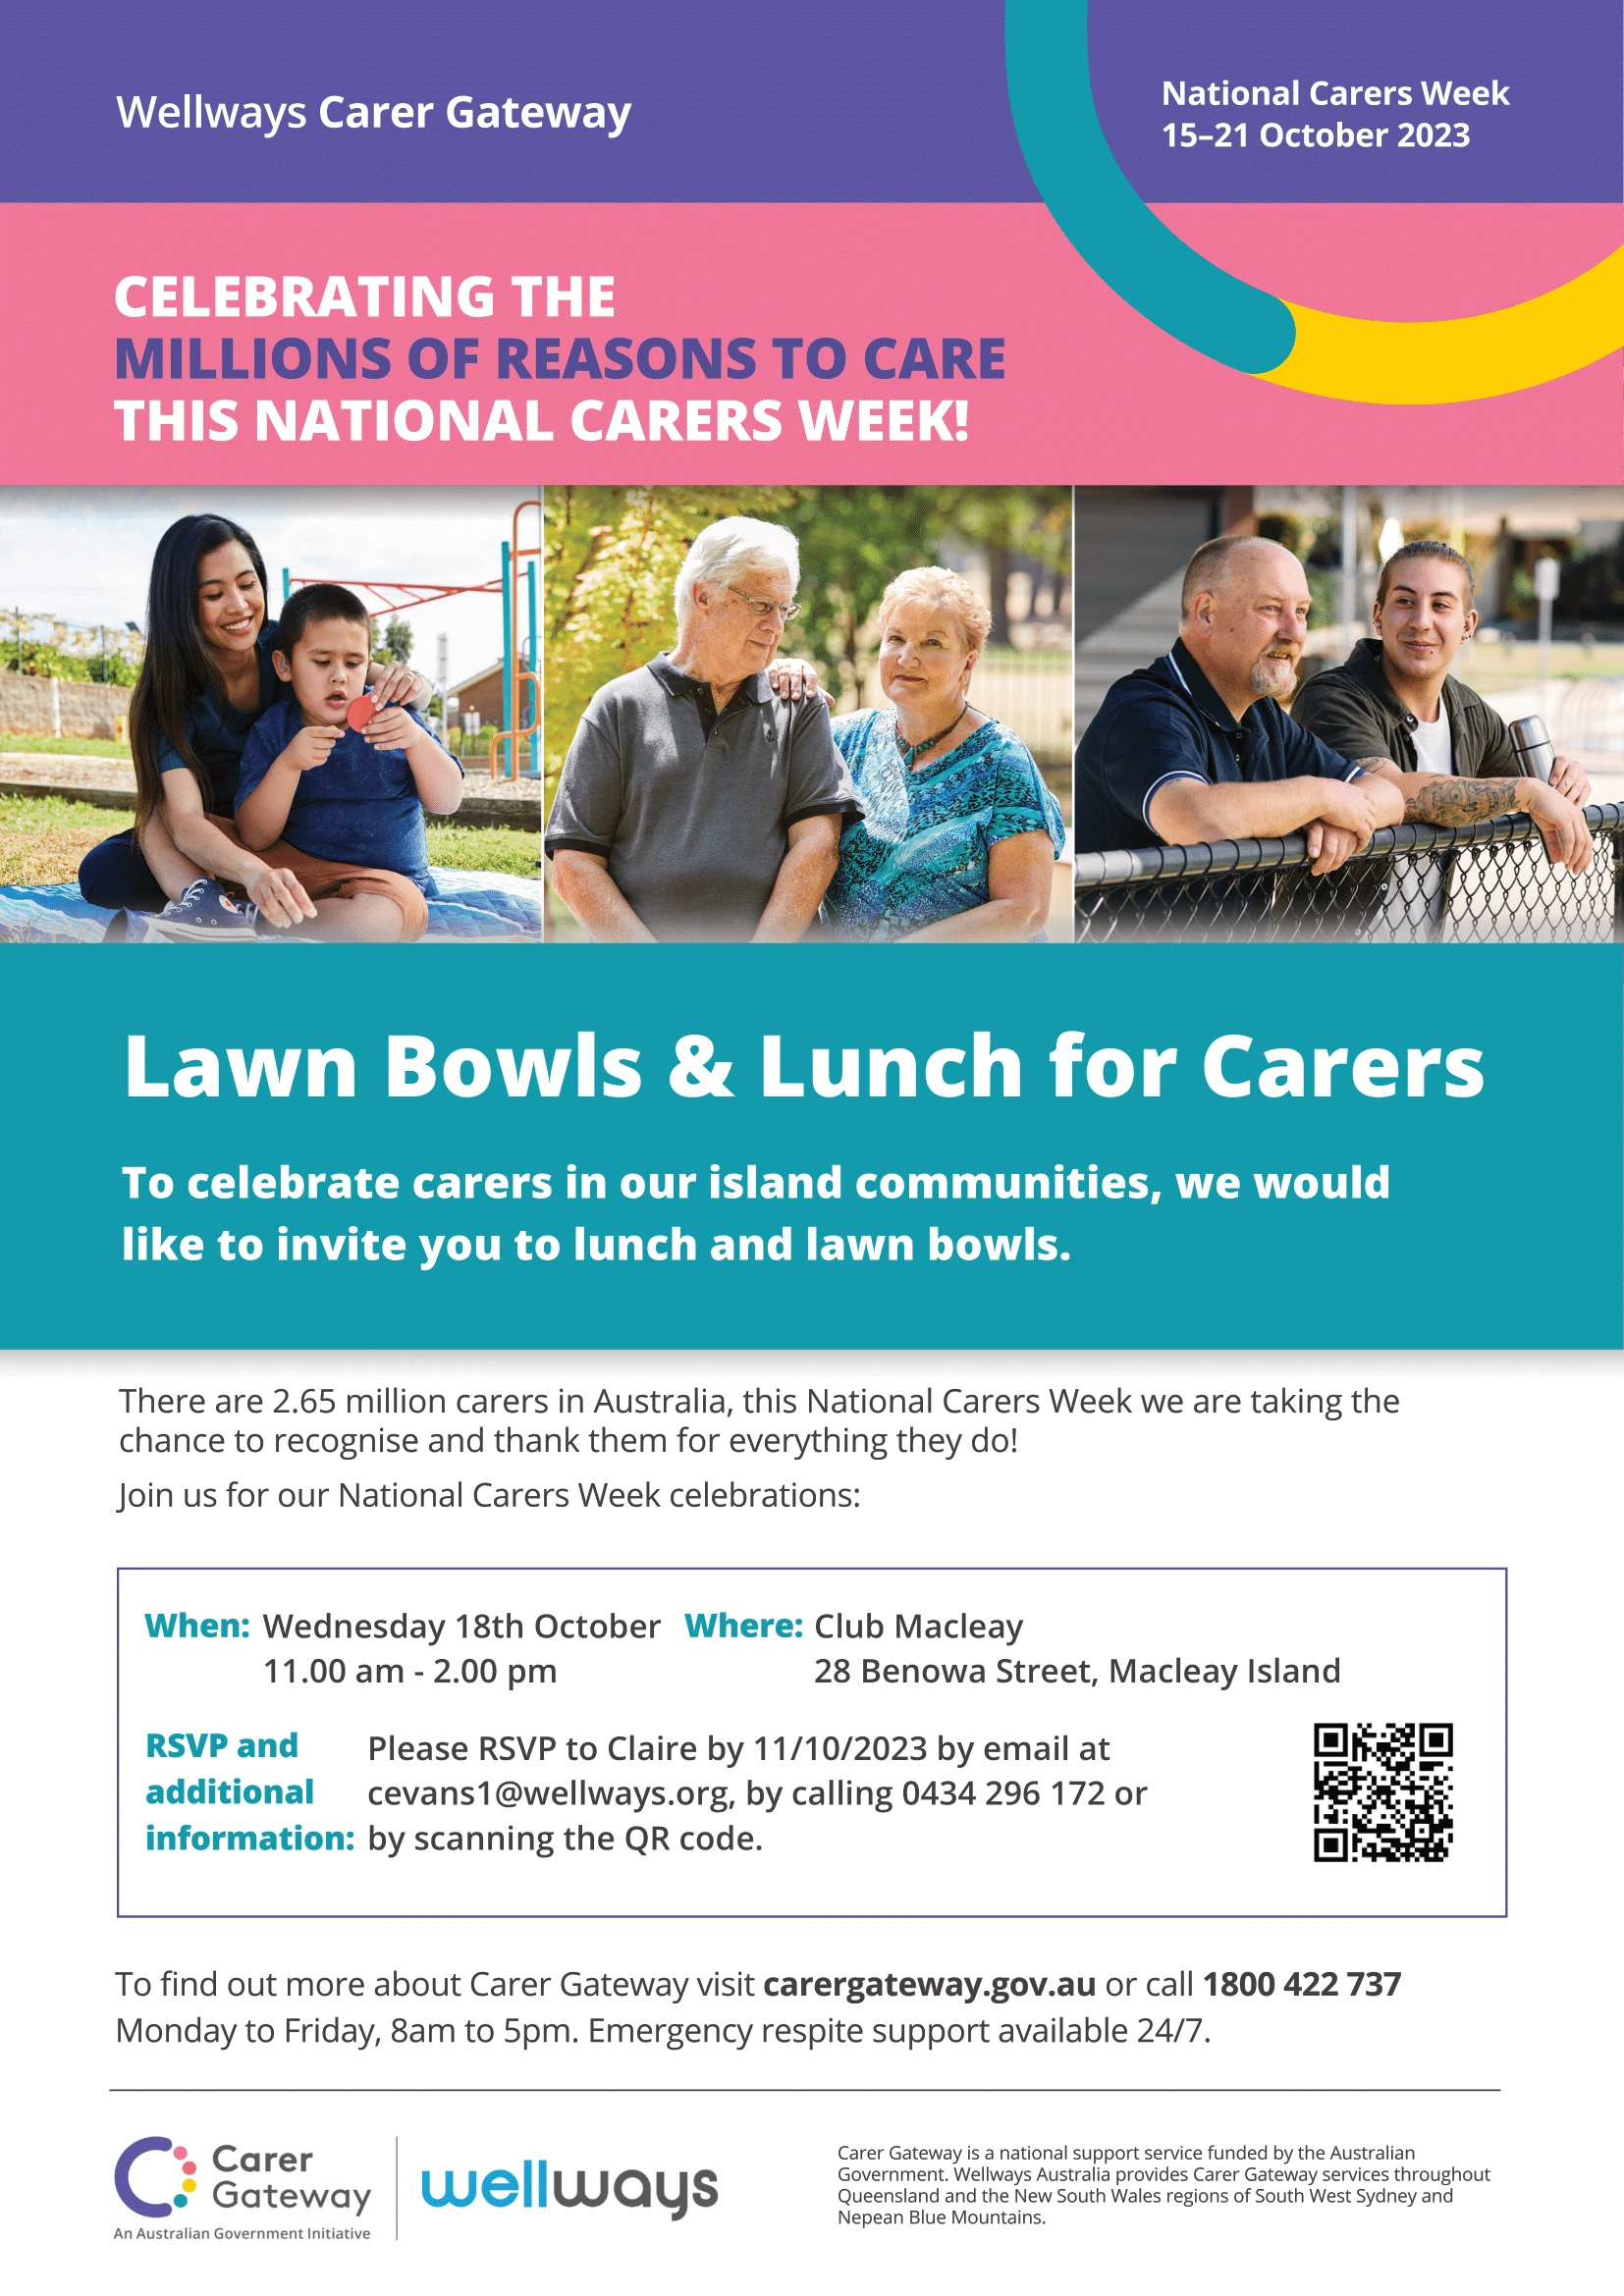 Lawn Bowls & Lunch with Carer Gateway